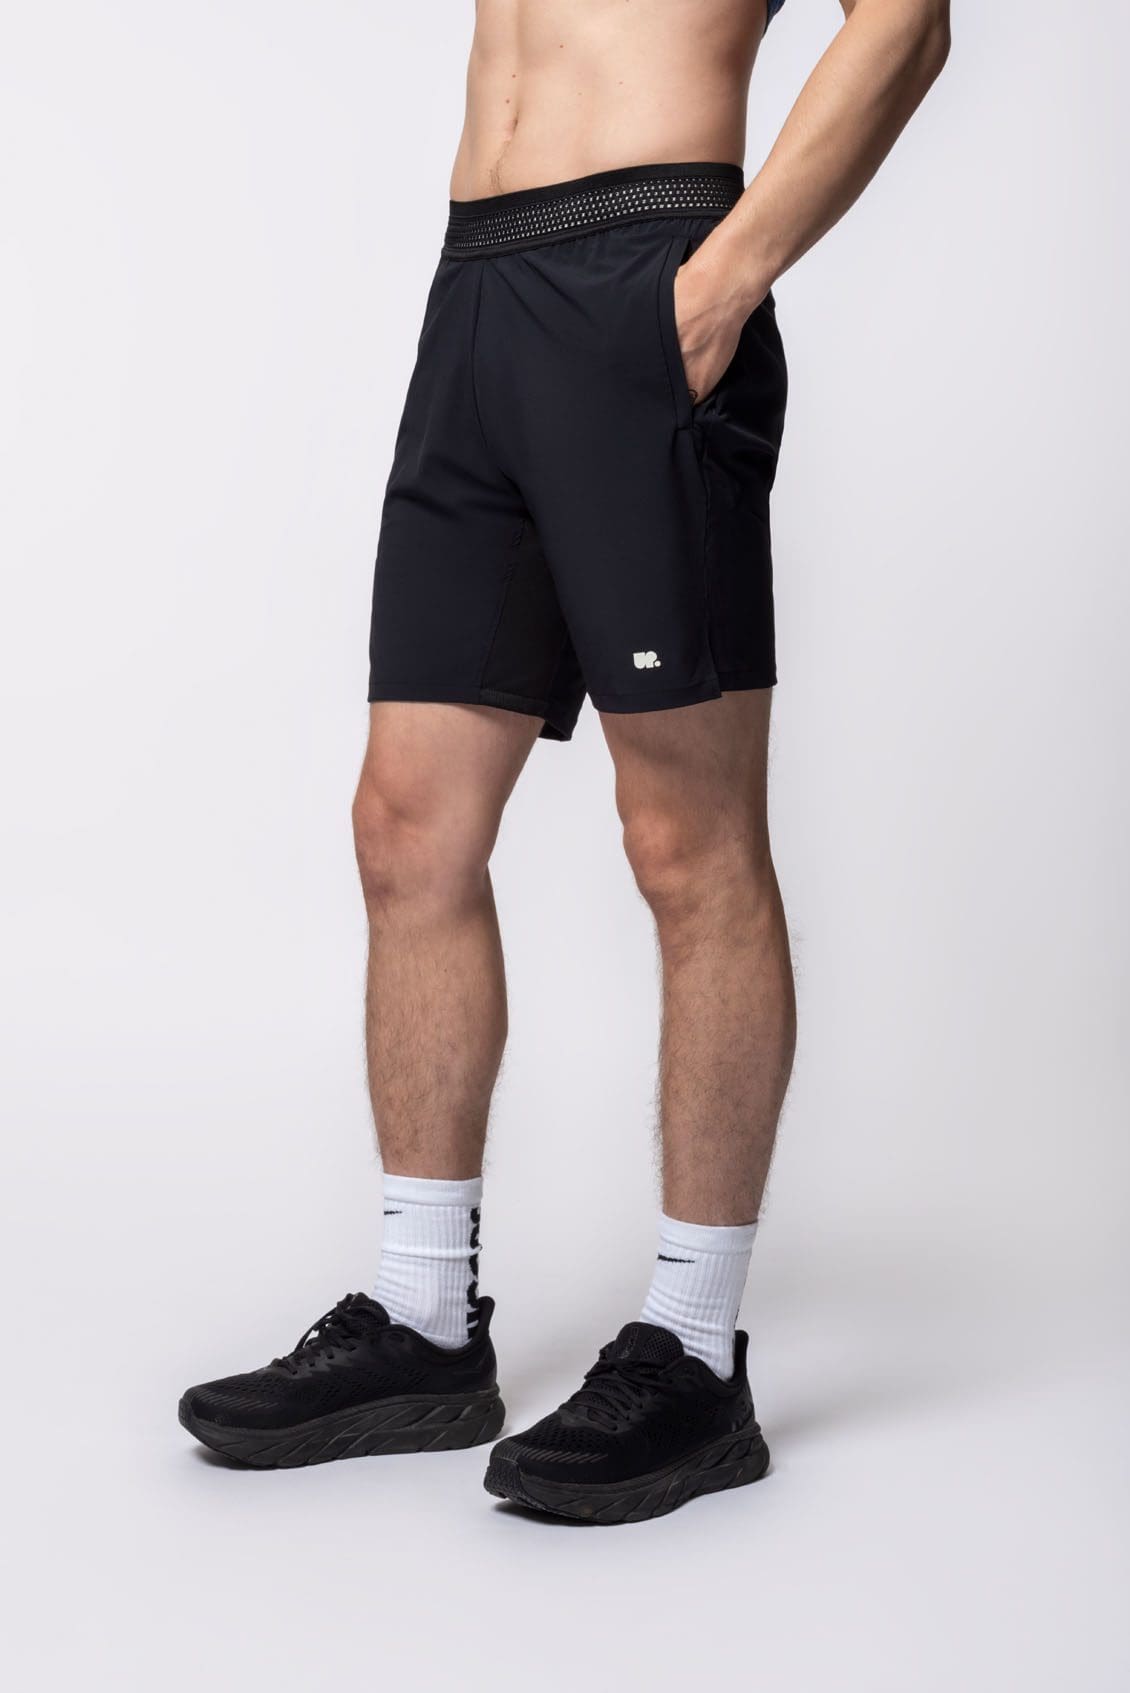 UKAP Men Breathable Running Gym Shorts with Built-in Underwear Active  Performance Jersey Shorts